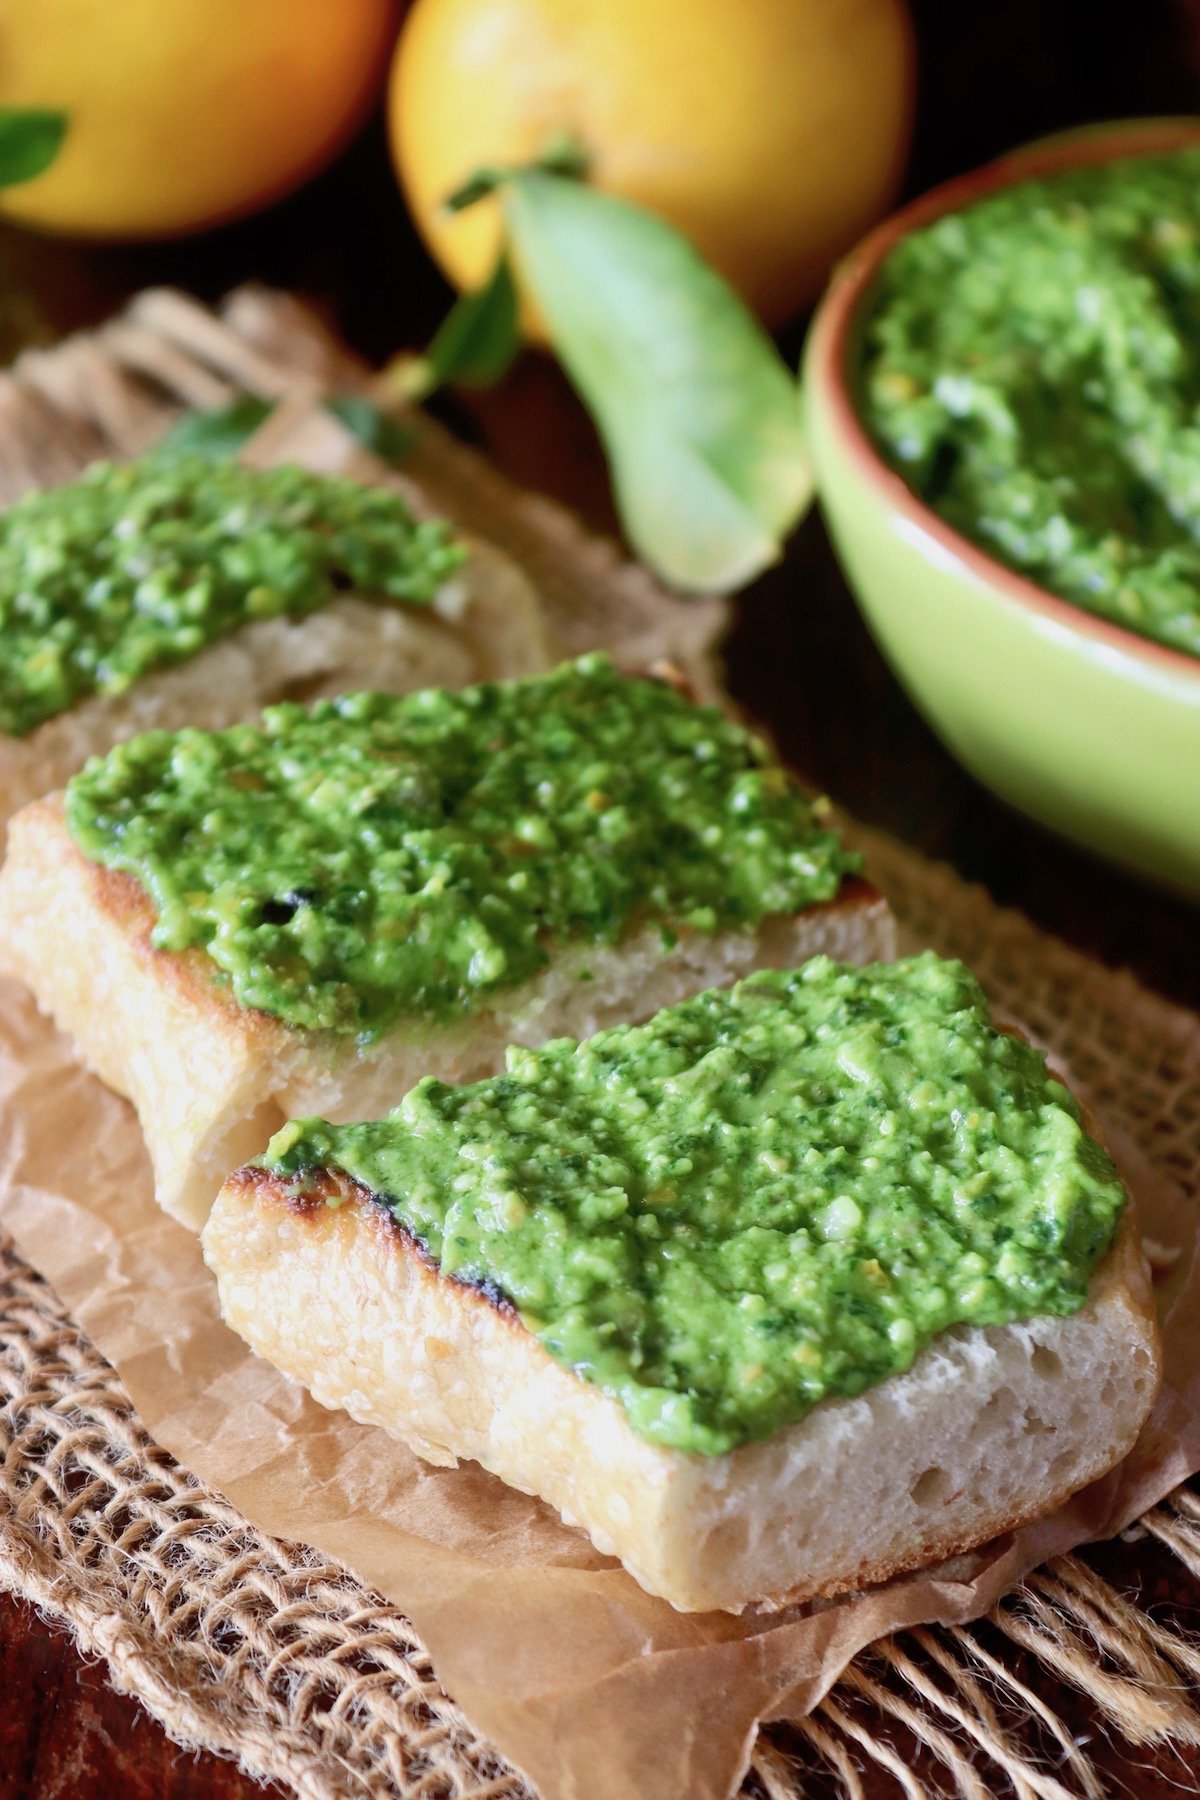 Three small pieces of French bread with a thick spread of pesto on top, on crinkled parchment paper with lemons behind them.